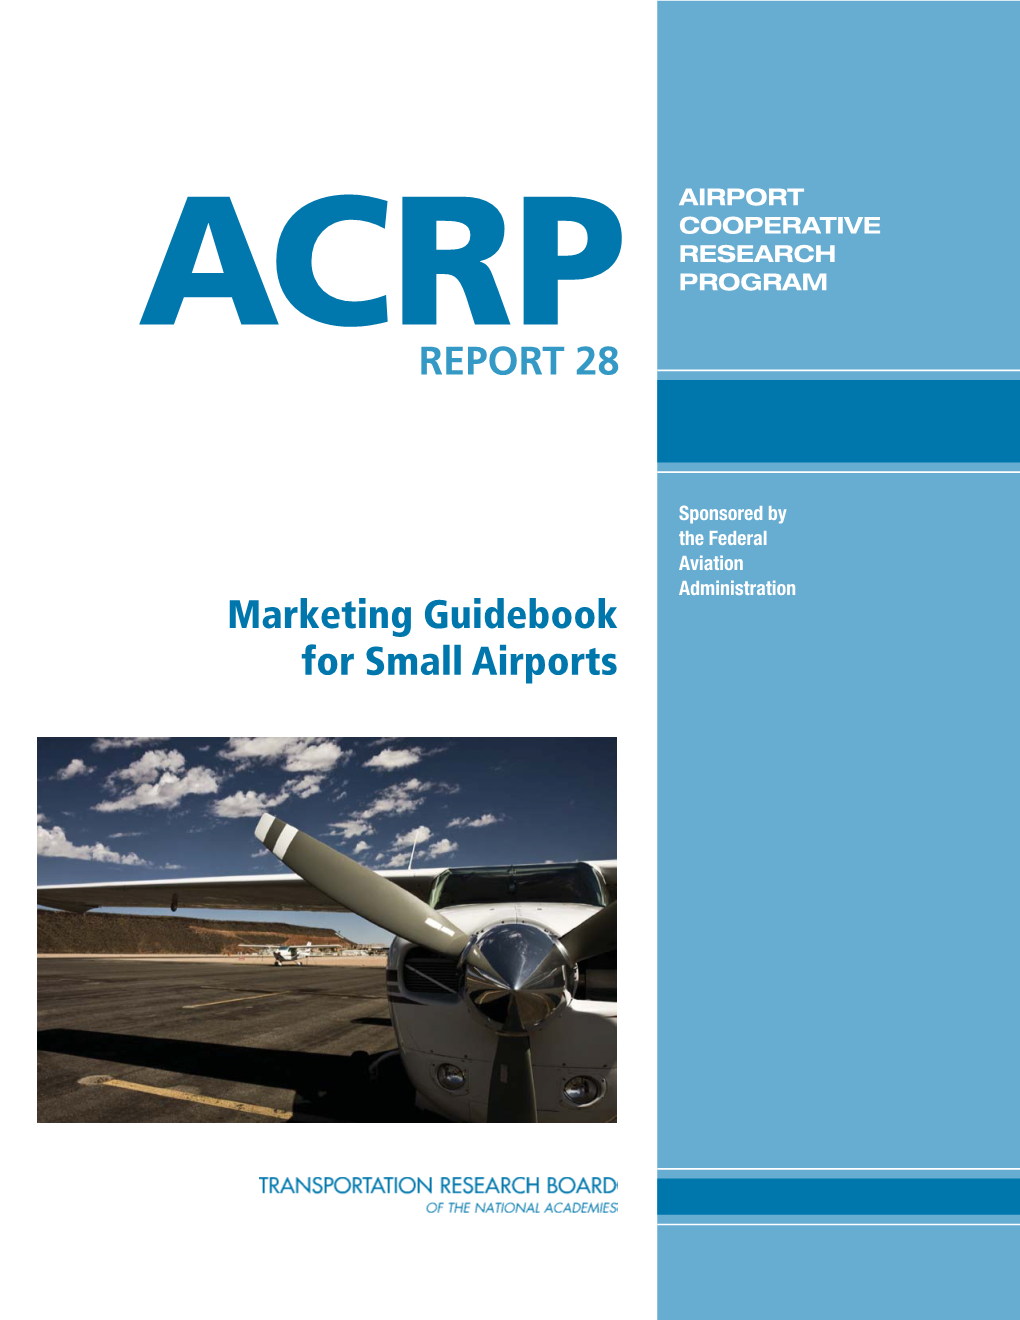 ACRP Report 28 – Marketing Guidebook for Small Airports